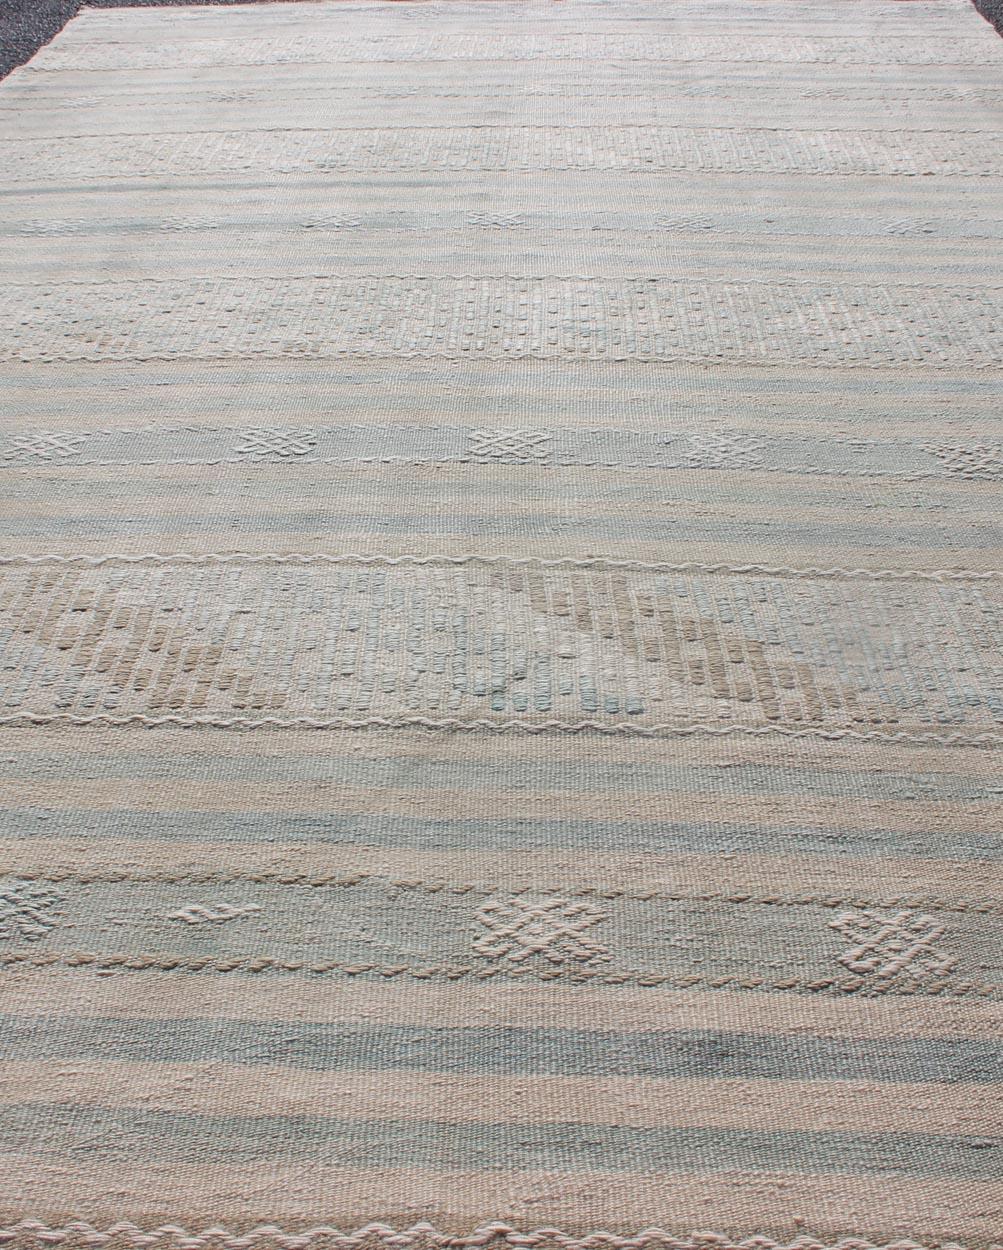 Wool Natural-Toned Turkish Flat-Weave Kilim with Geometric Stripes Tan and Seafoam For Sale